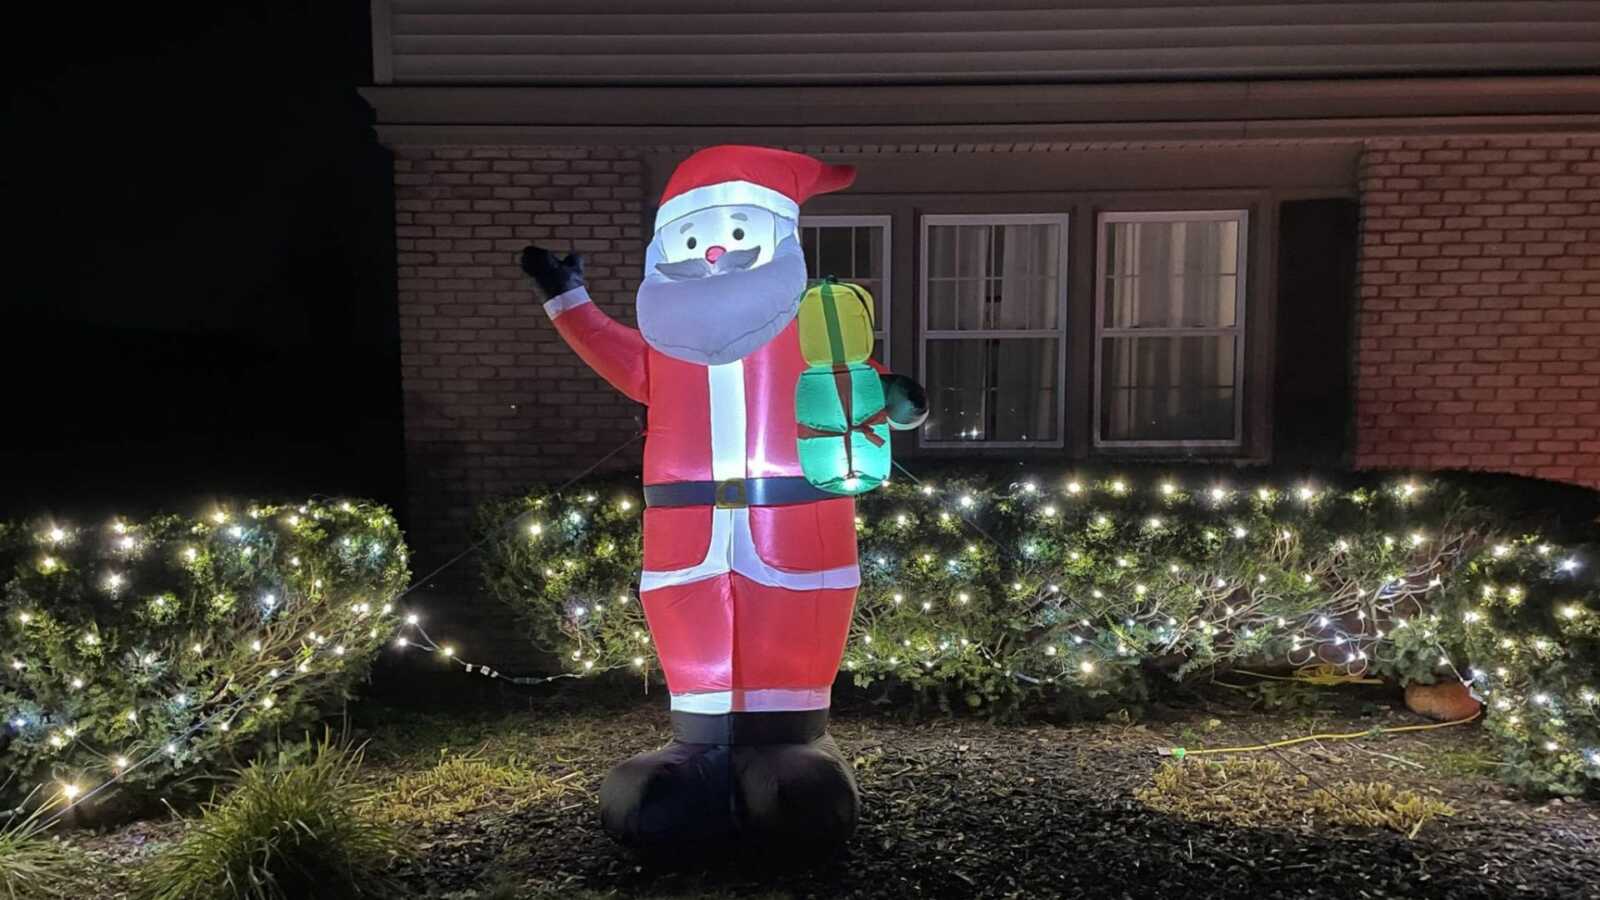 blow up Santa clause Christmas decoration placed in front yard